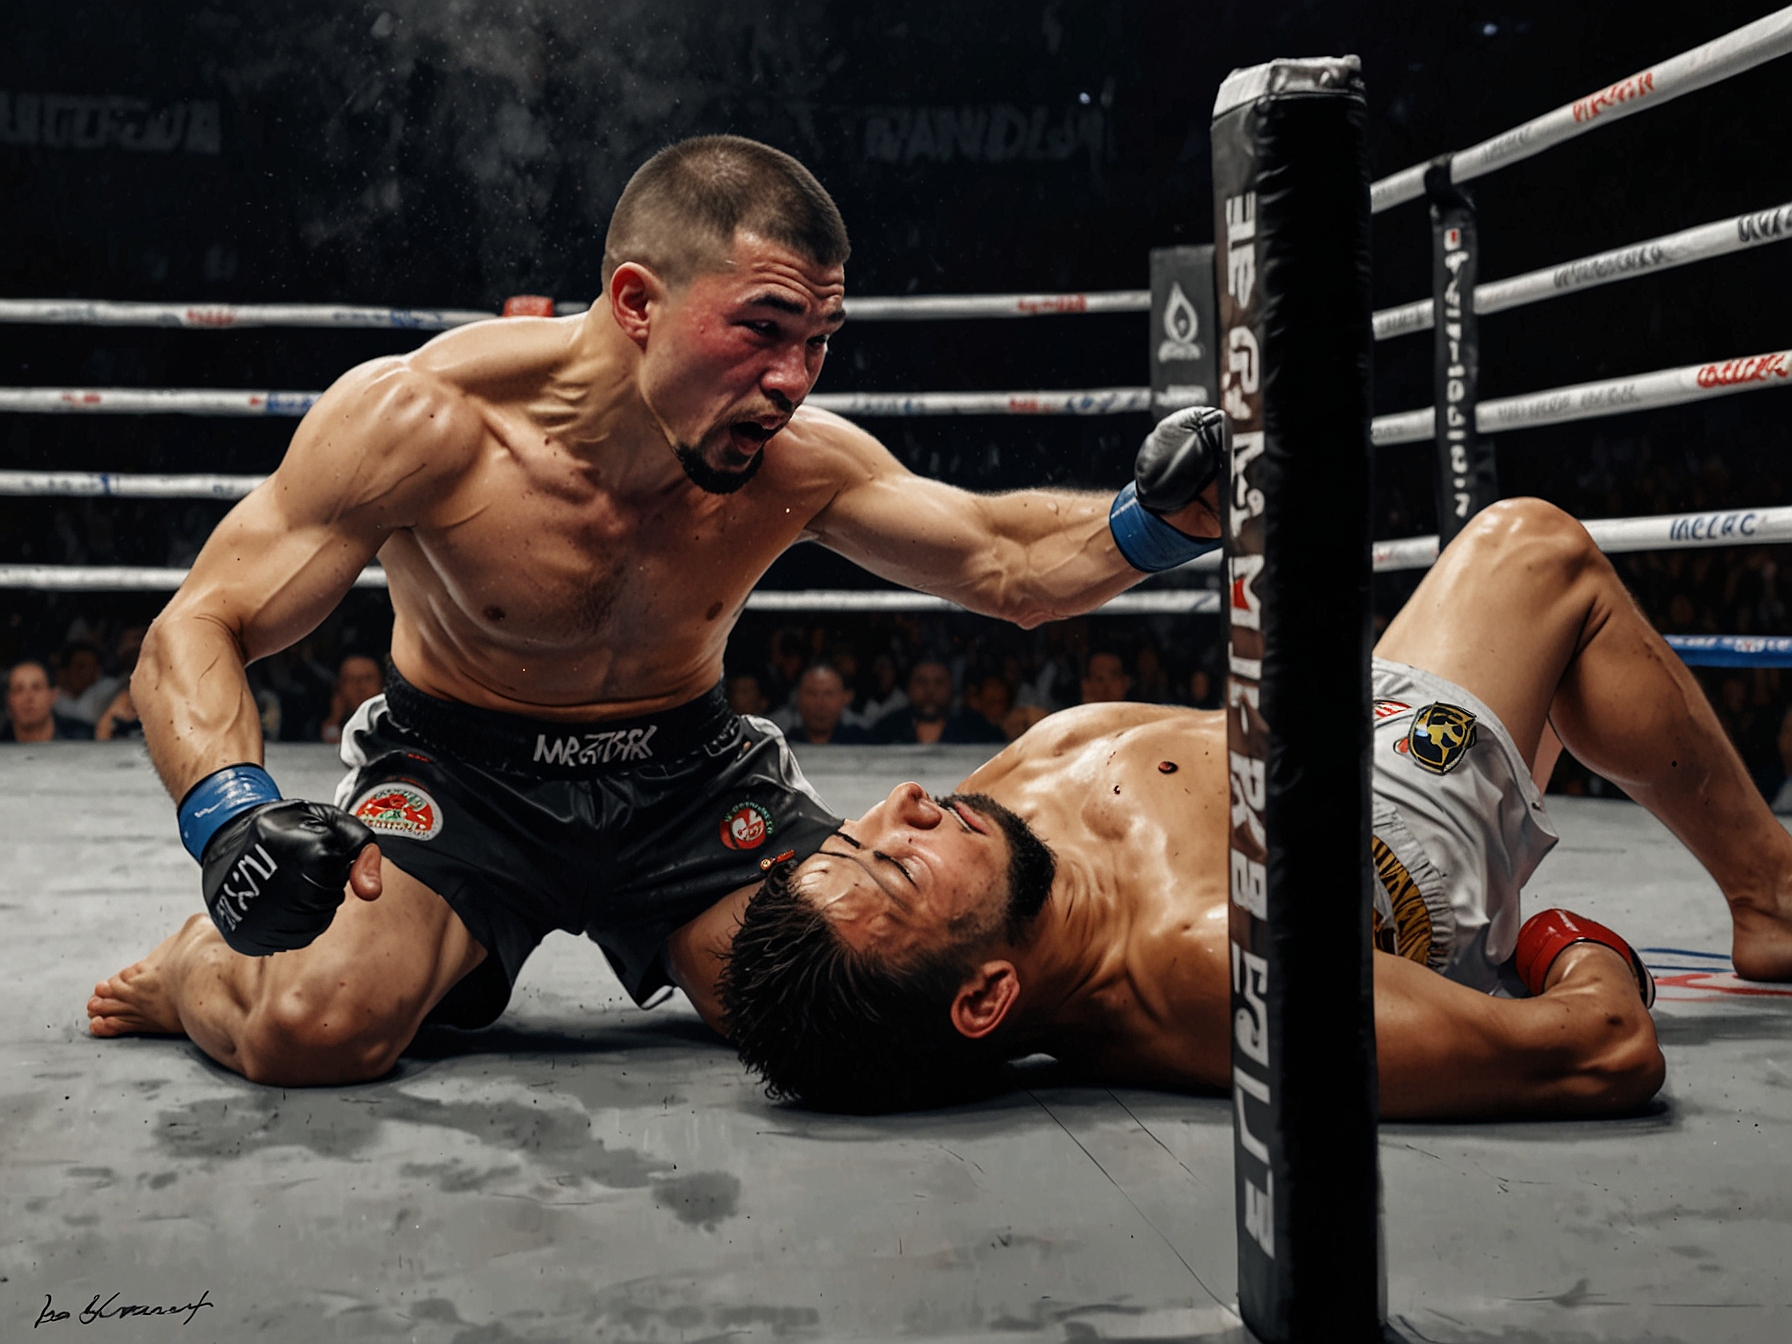 Ikram Aliskerov lies on the canvas as the referee stops the fight following a massive right hand from Robert Whittaker, who reestablished himself as a top contender in the middleweight division.